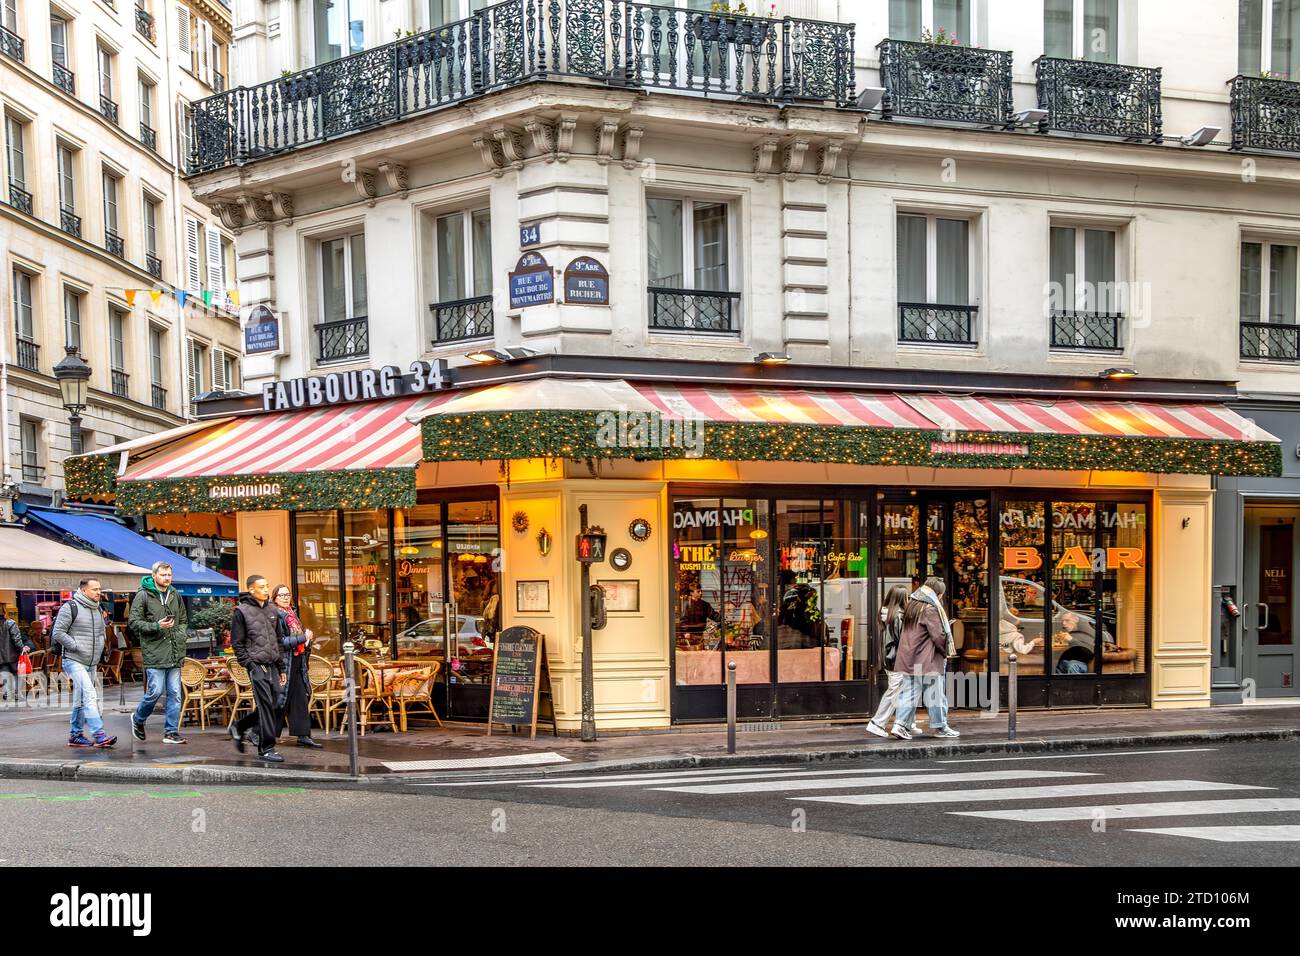 Faubourg 34 ,a trendy corner bistro on Rue du Faubourg Montmartre in the 9th arrondissement of Paris, France Stock Photo